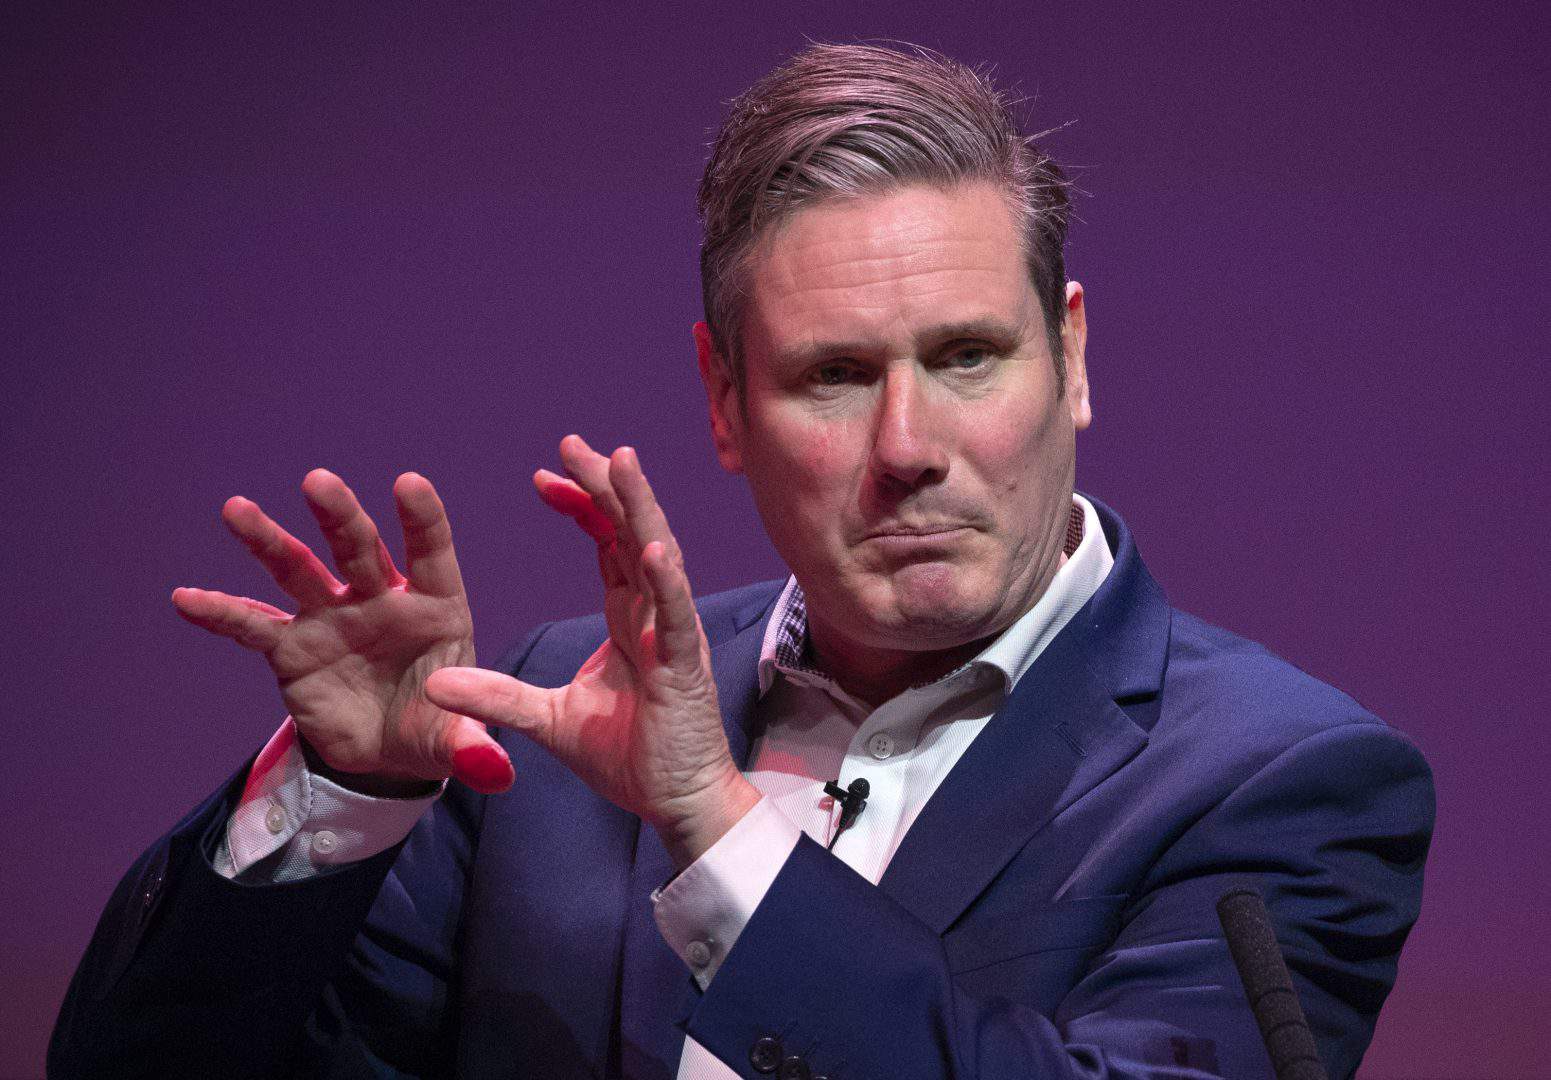 We’ve got a leader who looks like a prime minister: Reaction as Starmer wins Labour leadership contest